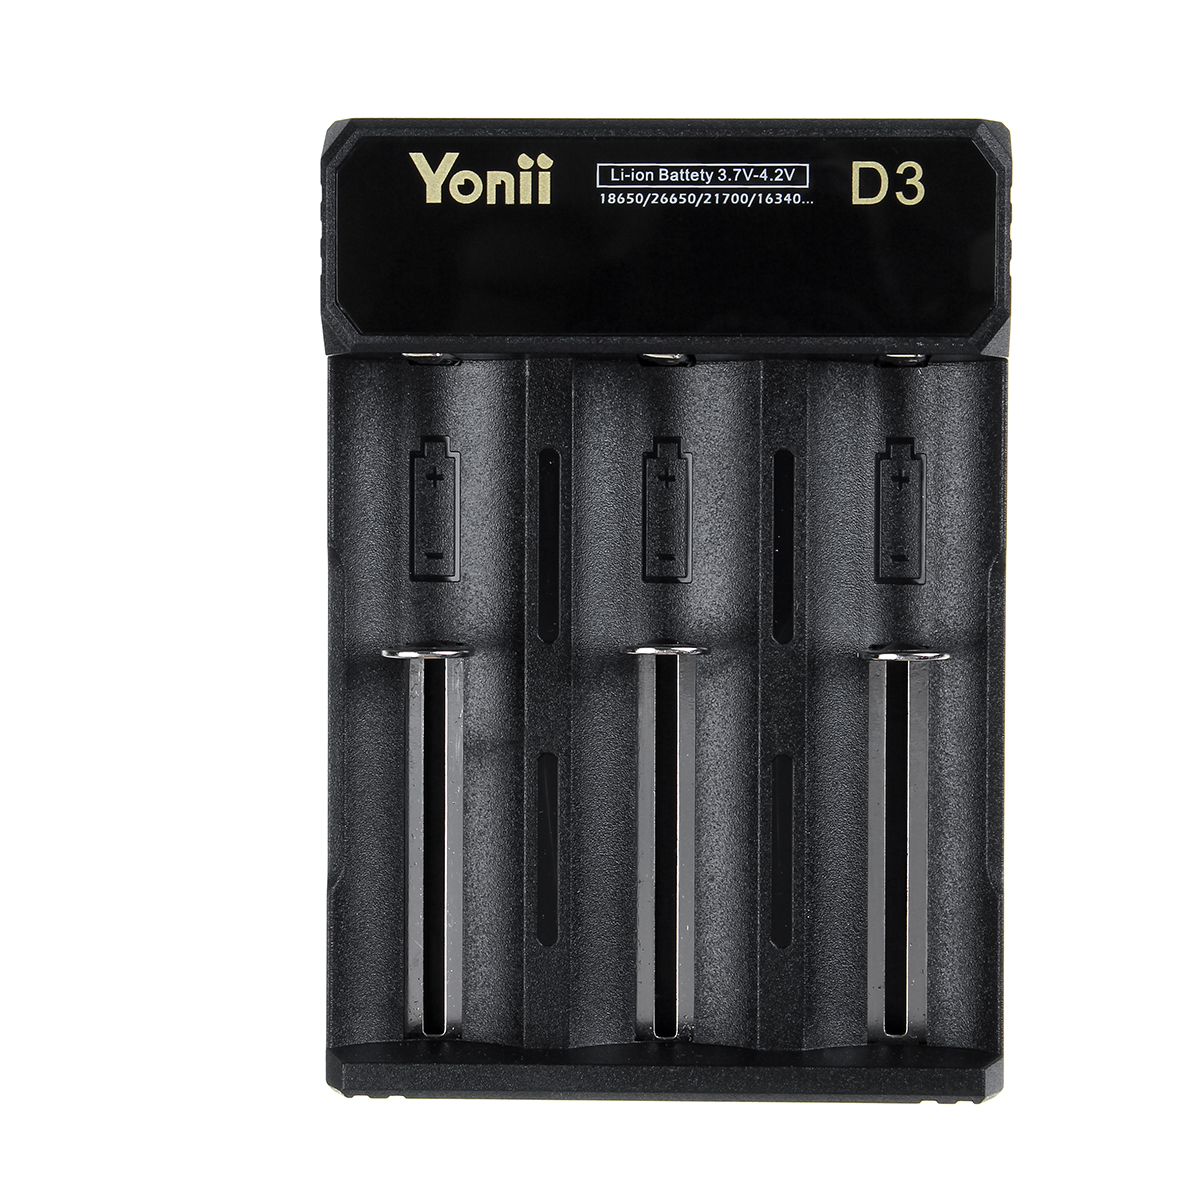 Portable-DC-5V-2A-3-Slot-USB-Rechargeable-Battery-Charger-For-AA-AAA-Battery-1632492-1